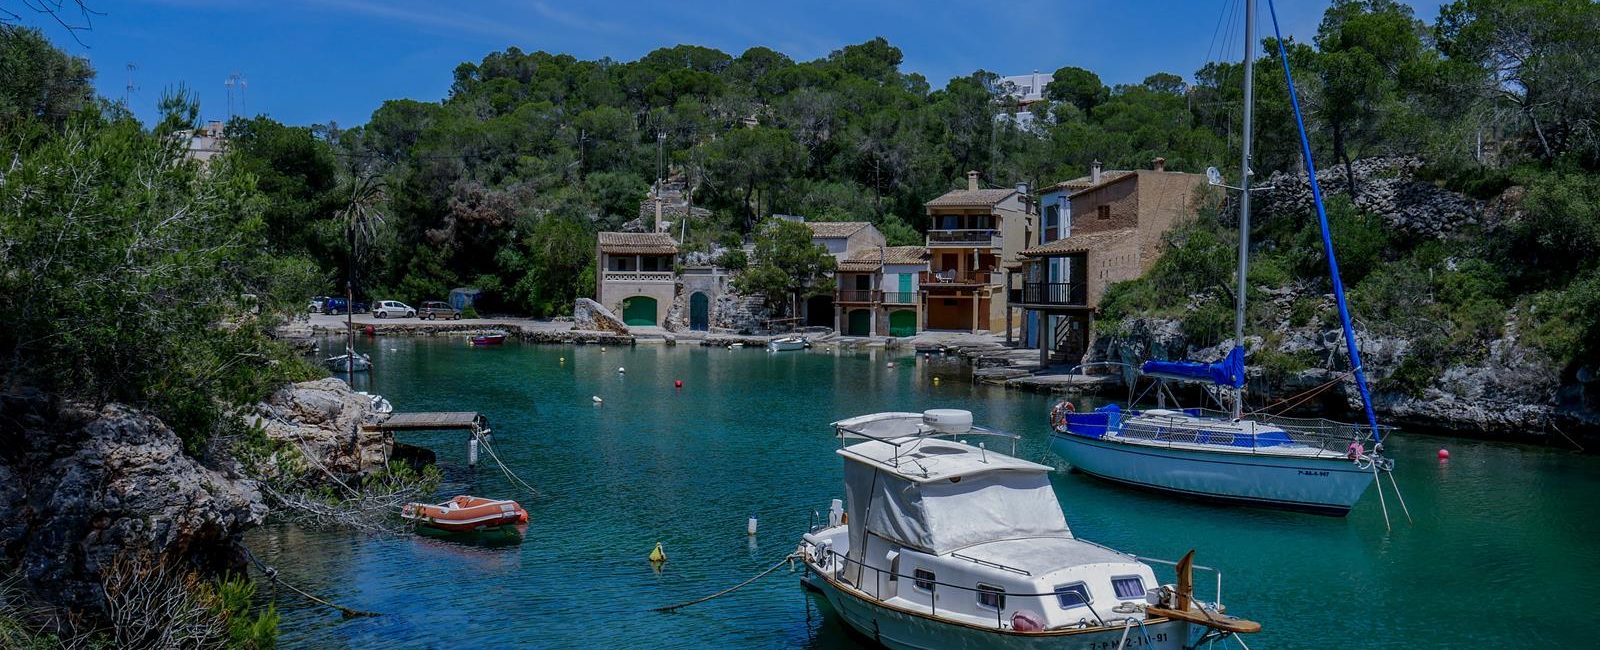 Figuera Harbor – the most beautiful port in Majorca!